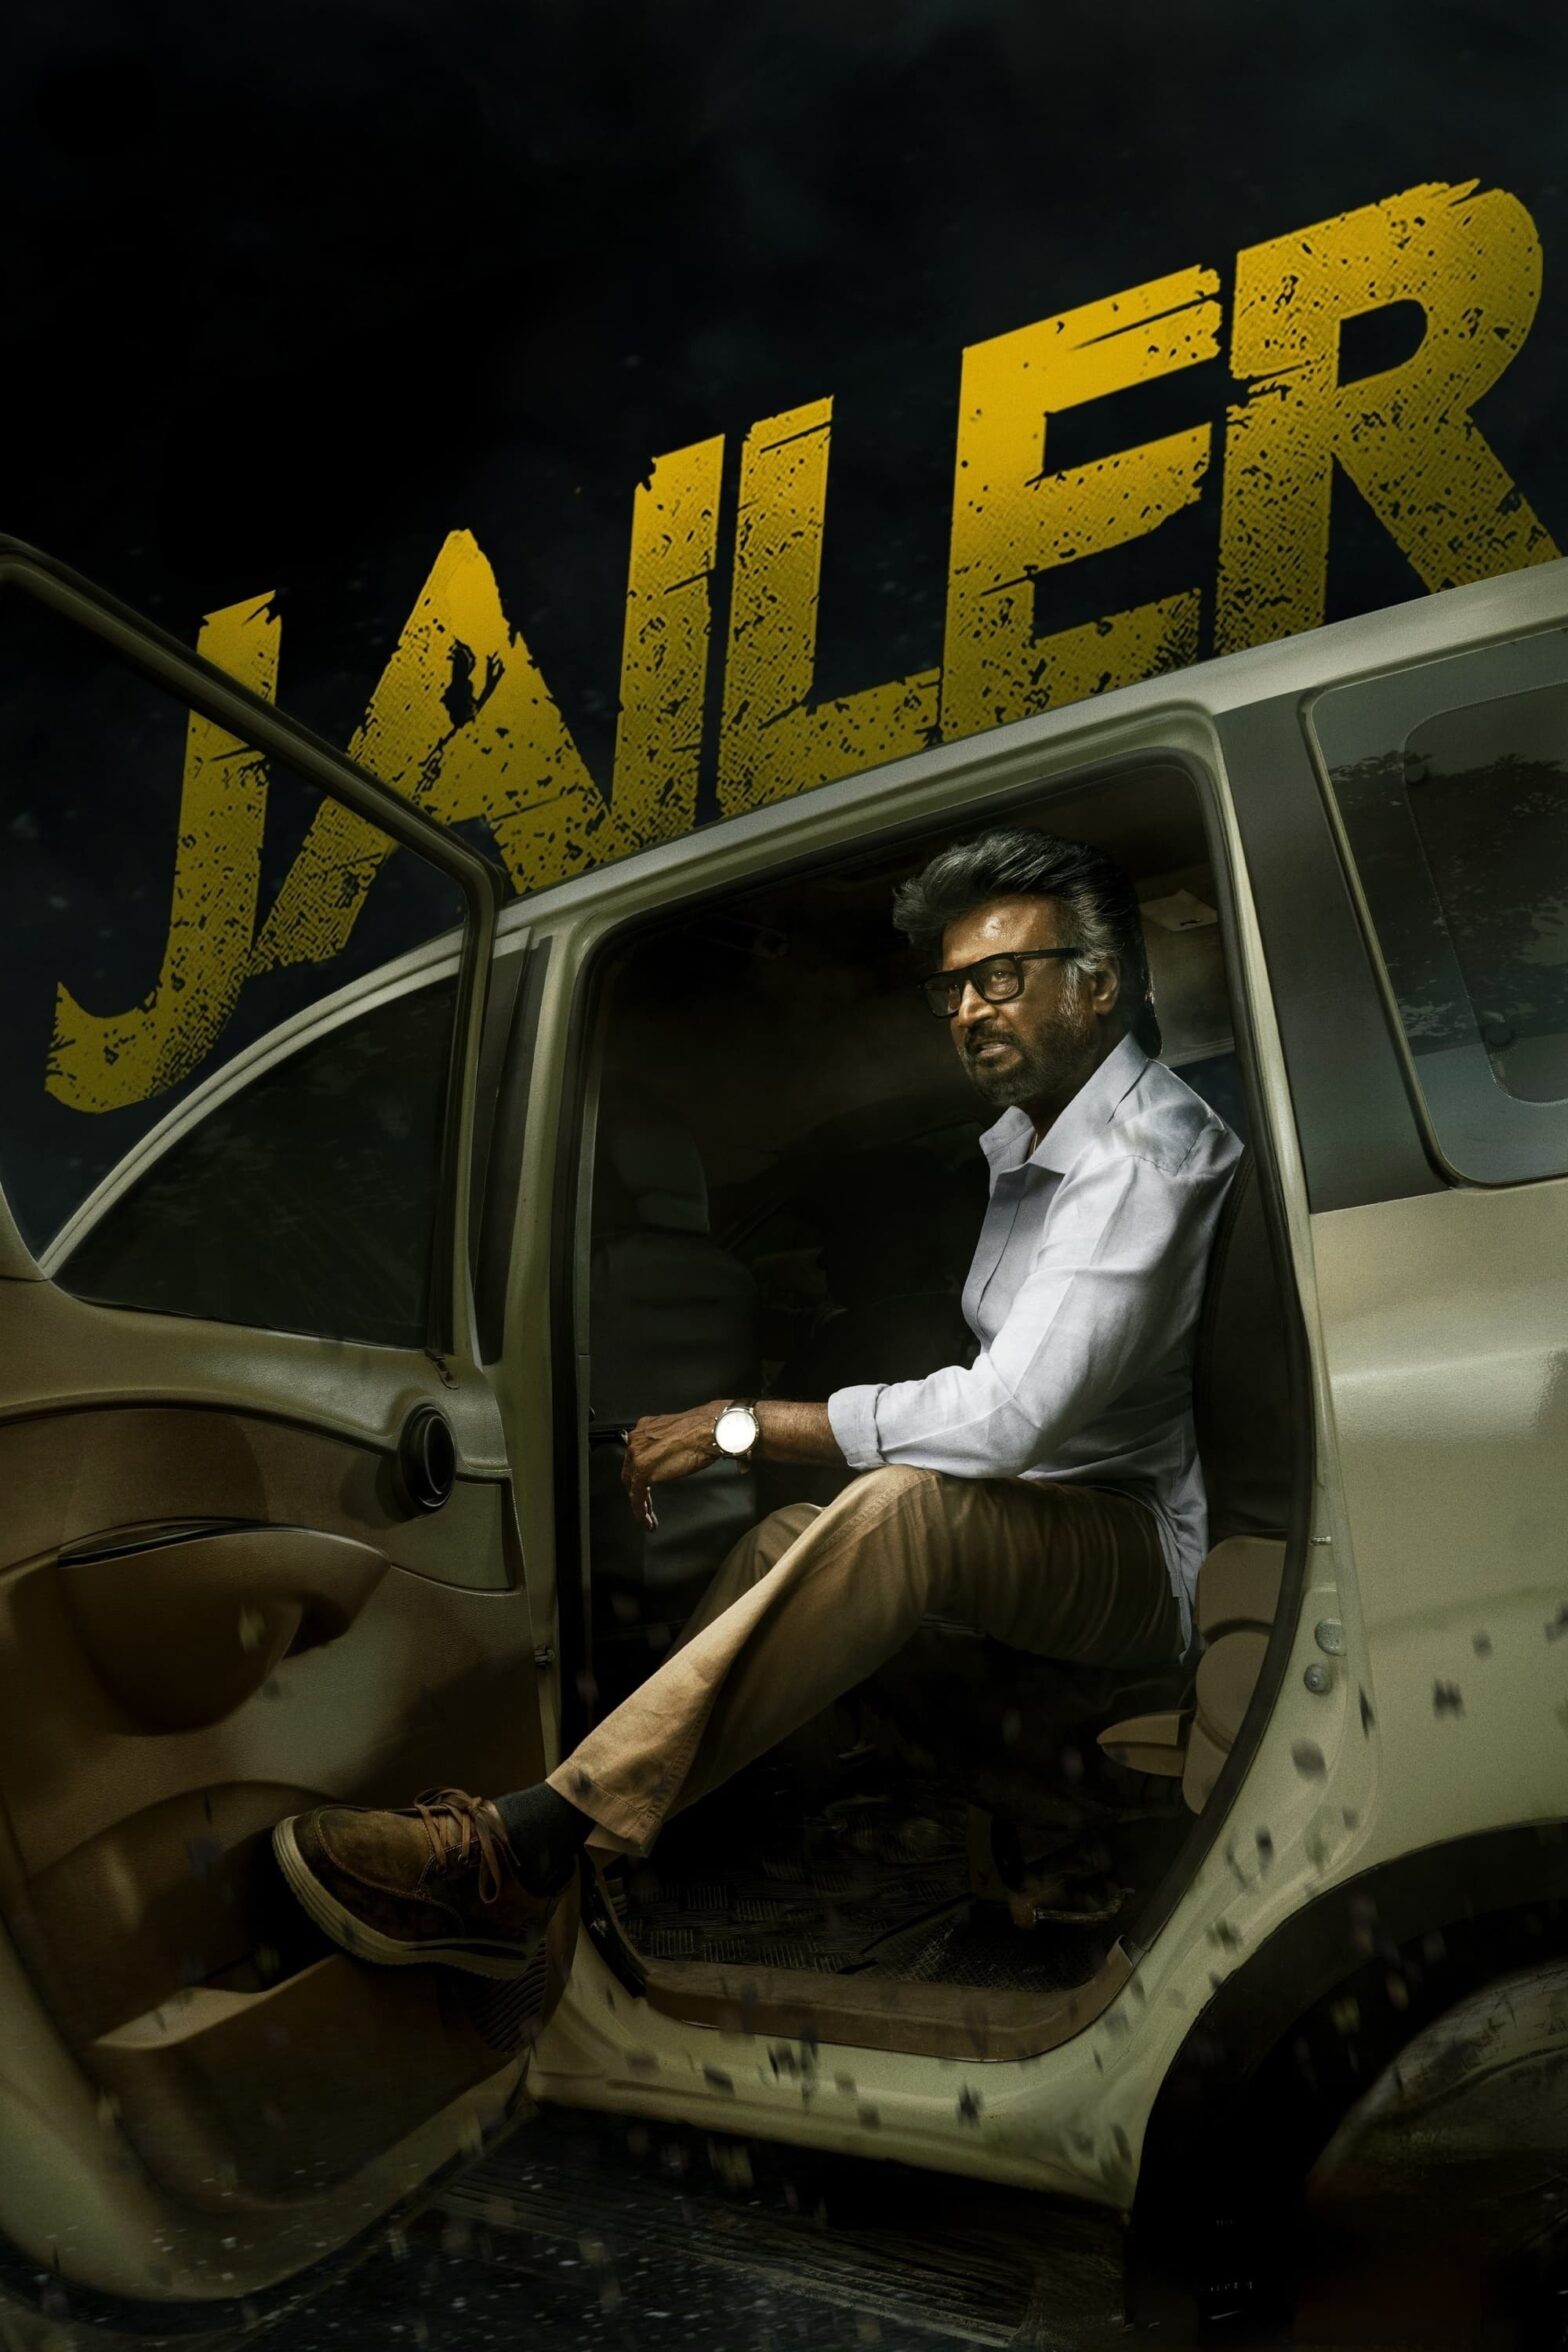 Poster for the movie "Jailer"